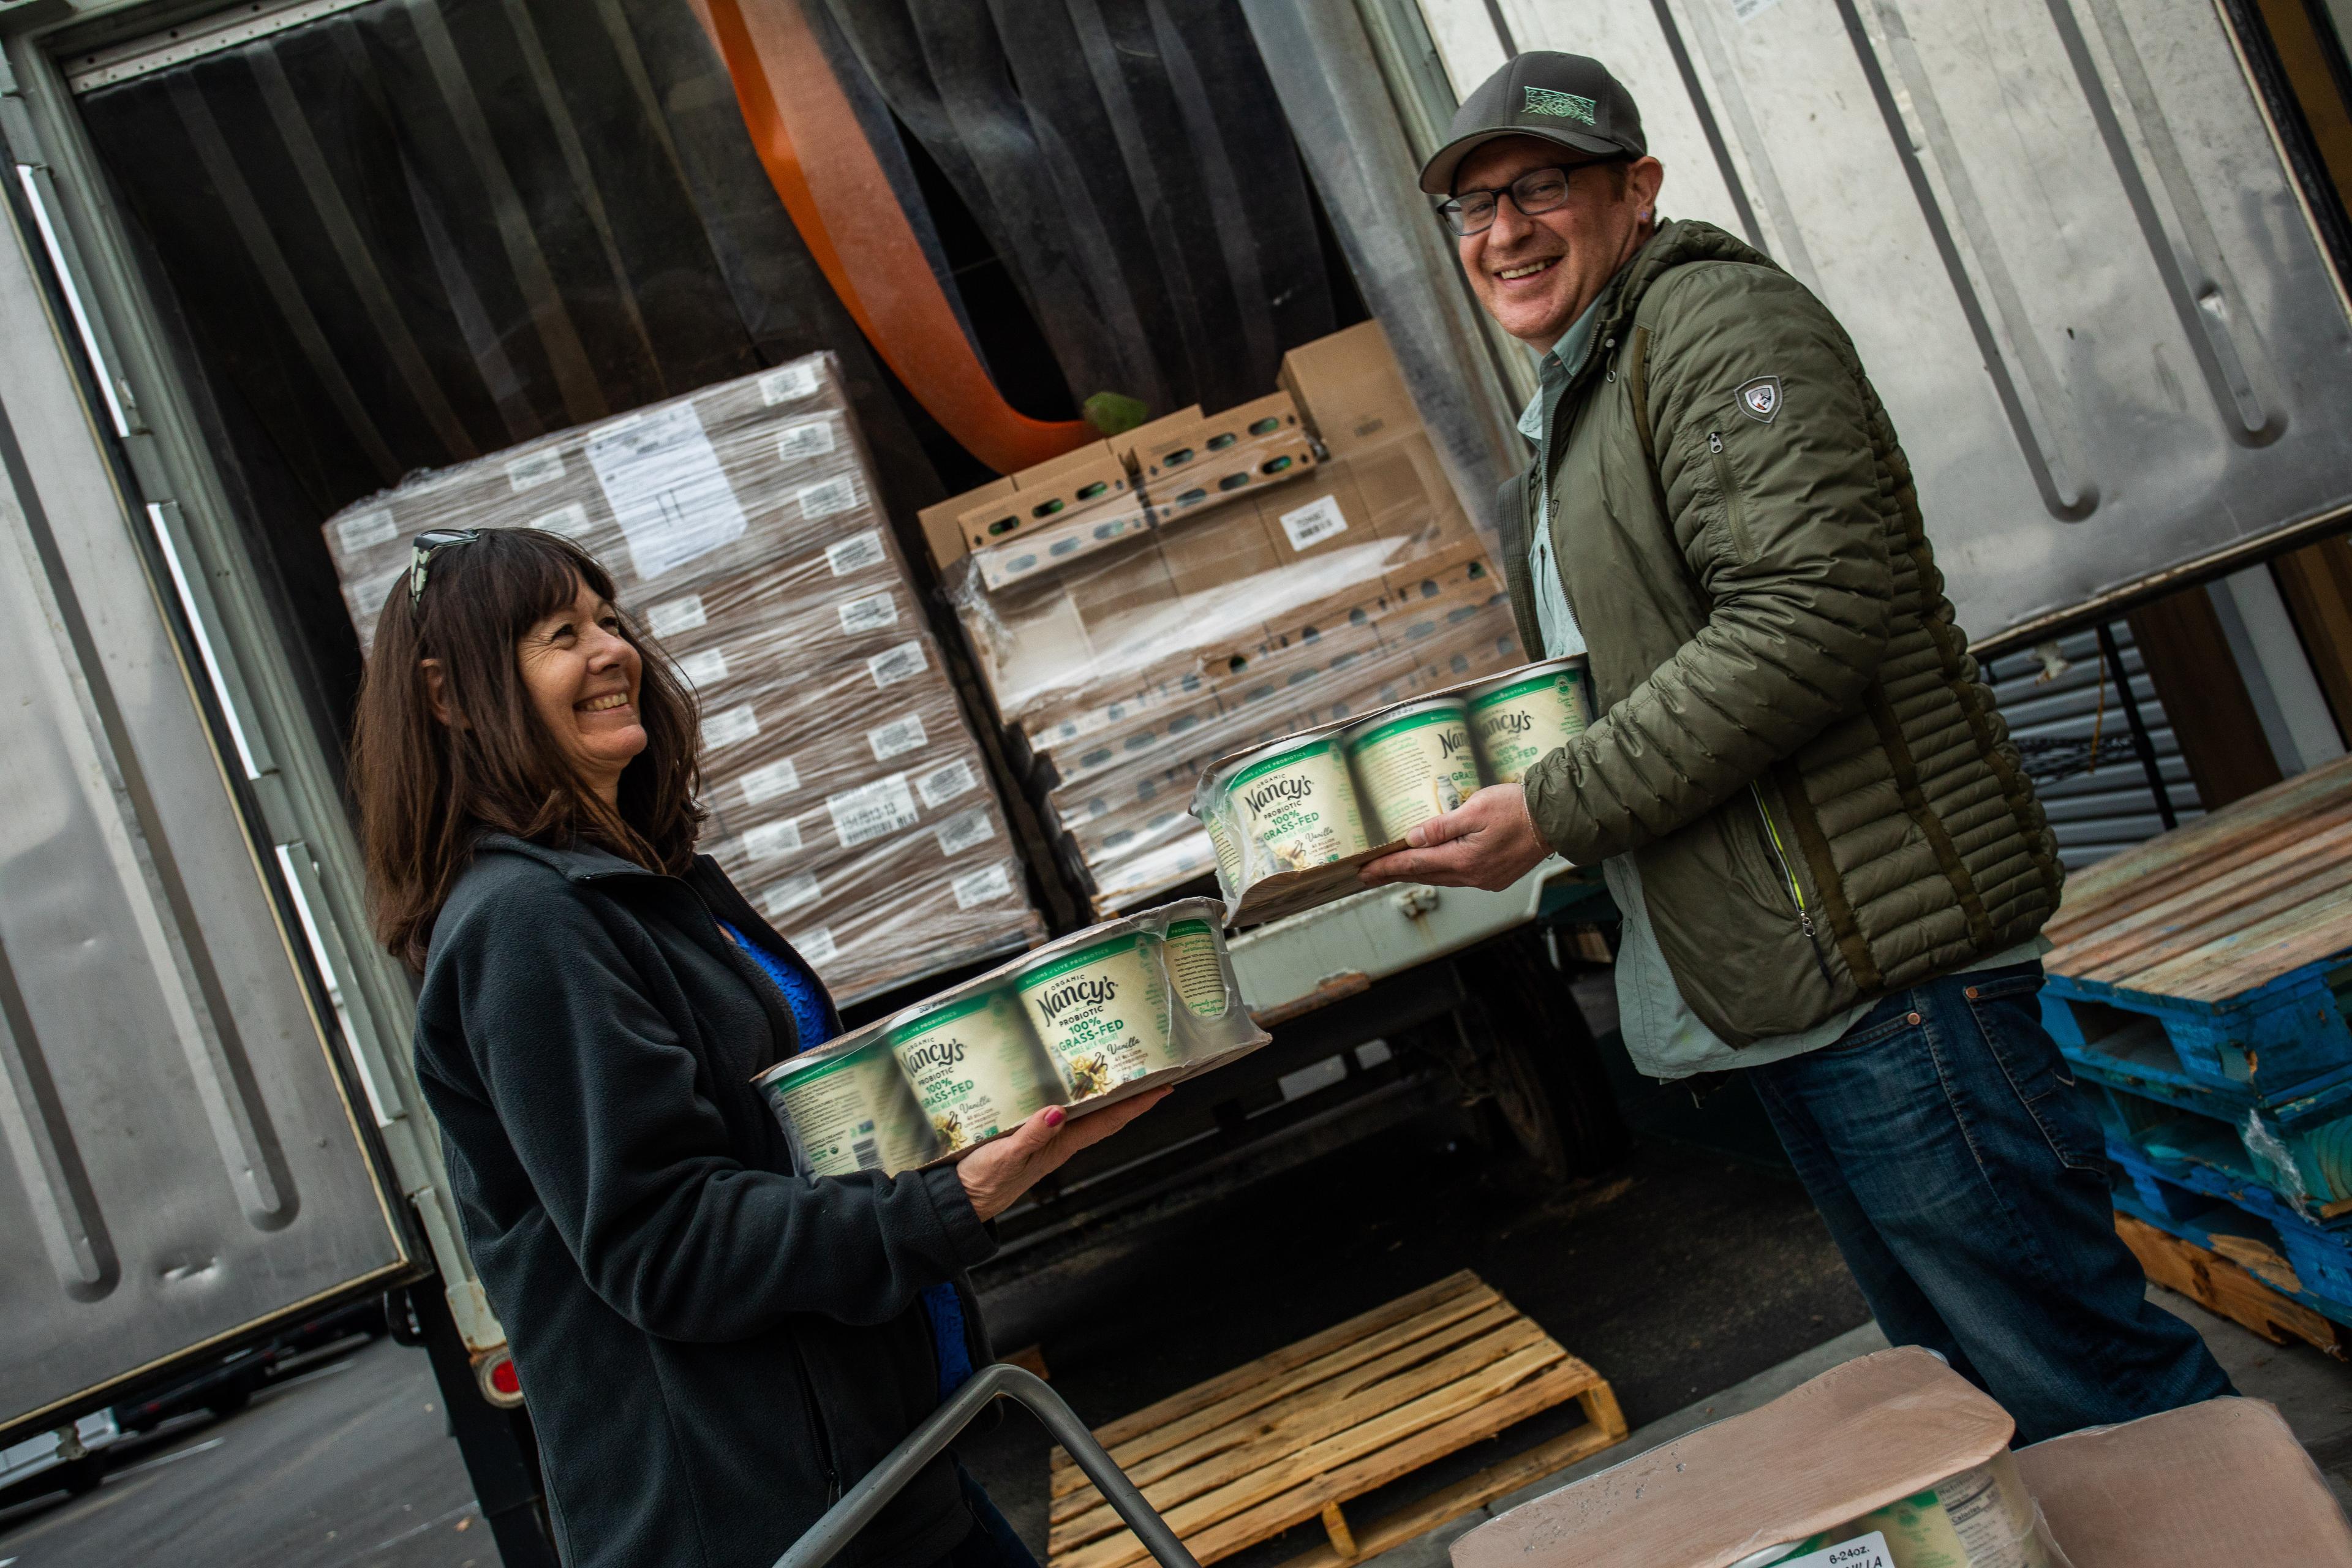 A man and a woman smile as they unload Nancy’s yogurt from a delivery truck.